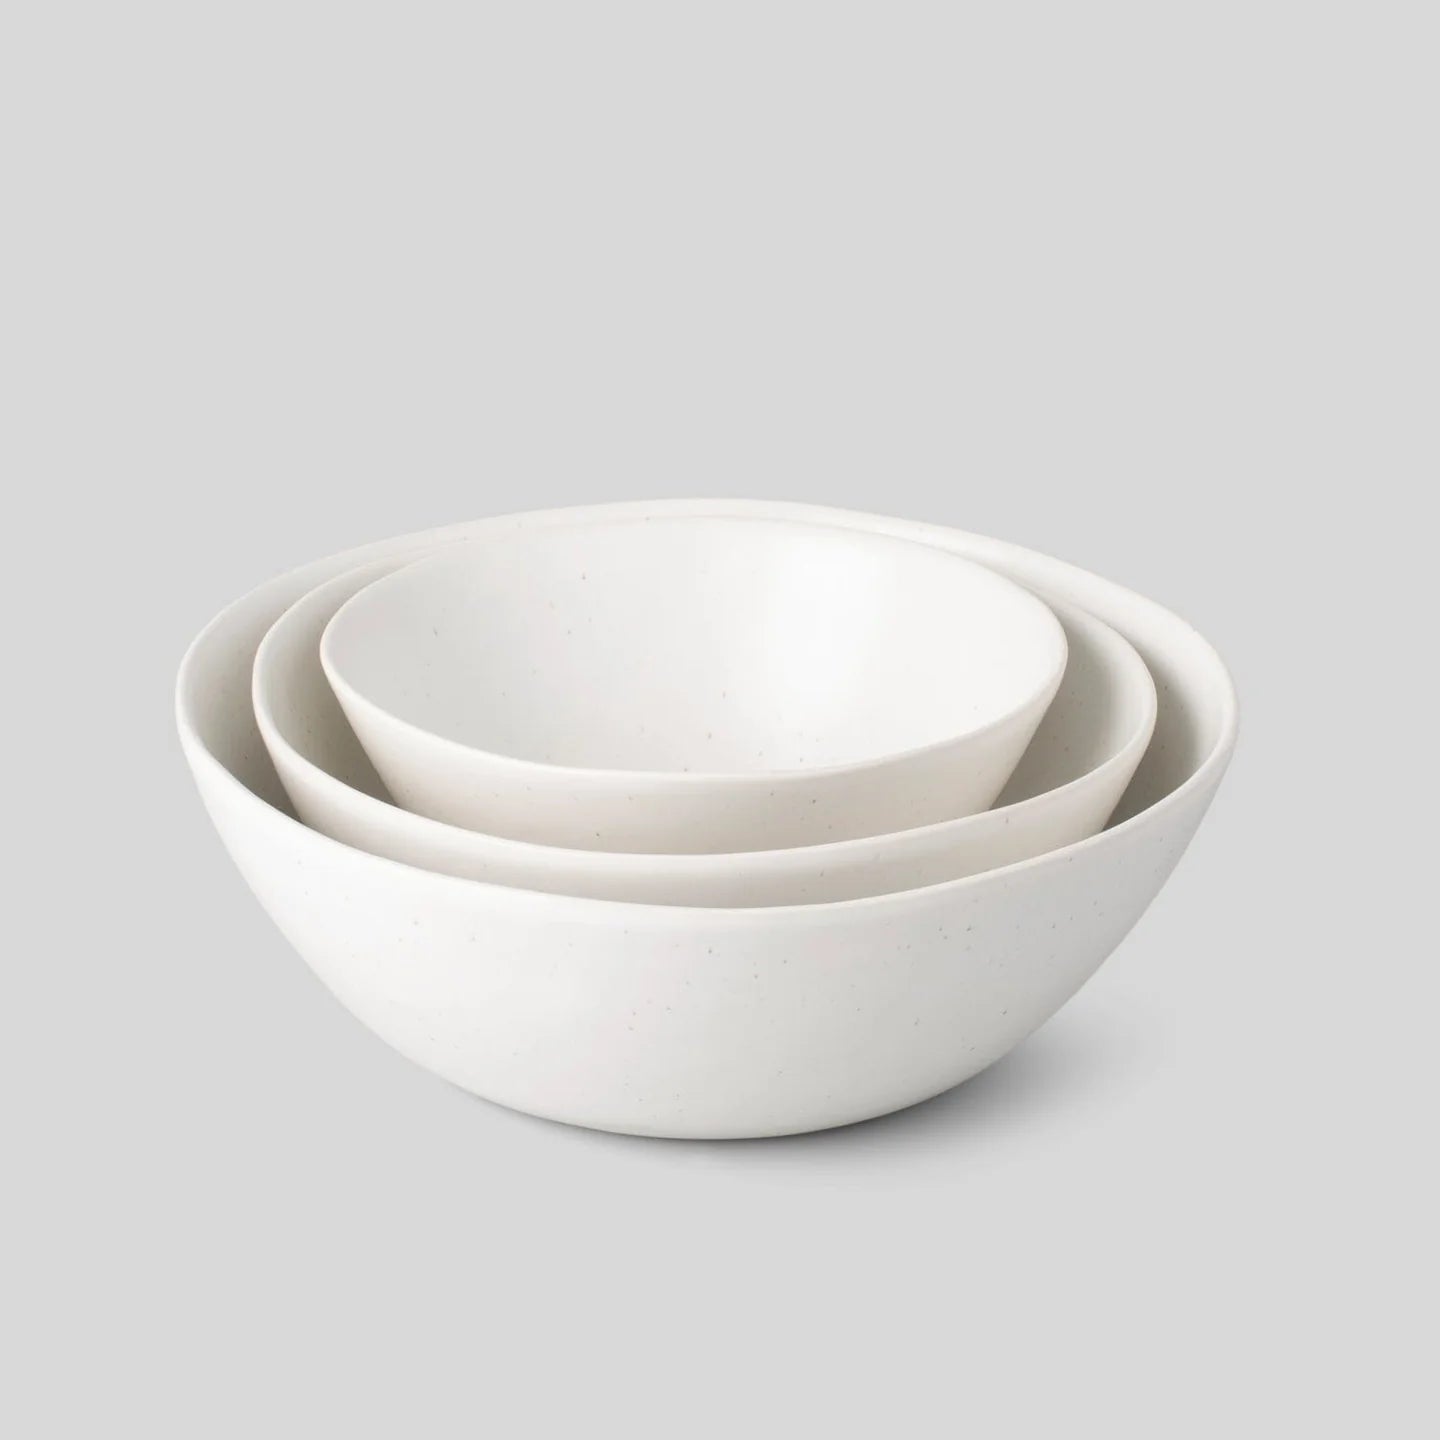 The Nested Serving Bowls - Speckled White